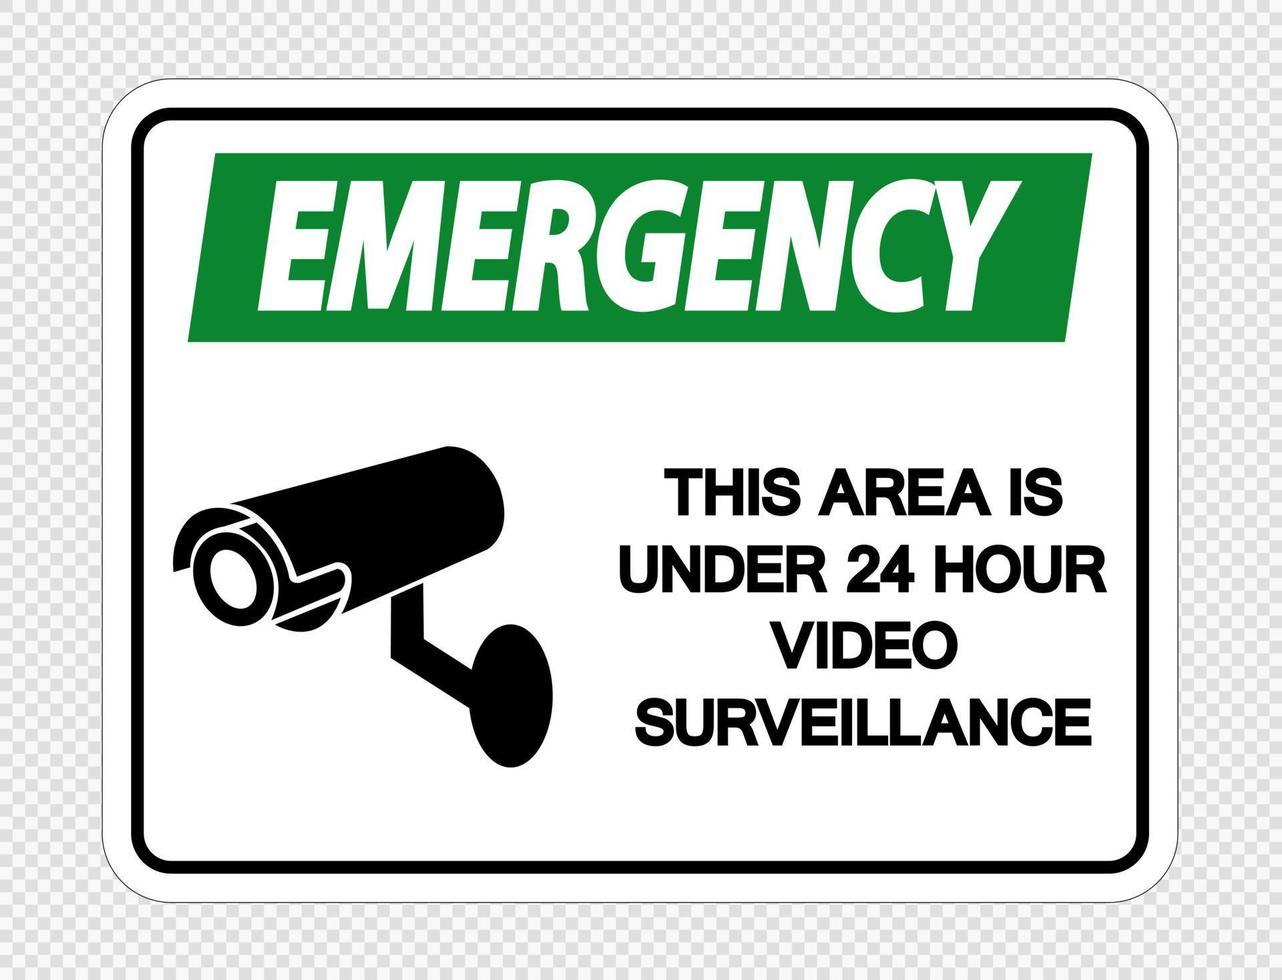 Emergency This Area is Under 24 Hour Video Surveillance Sign on transparent background vector